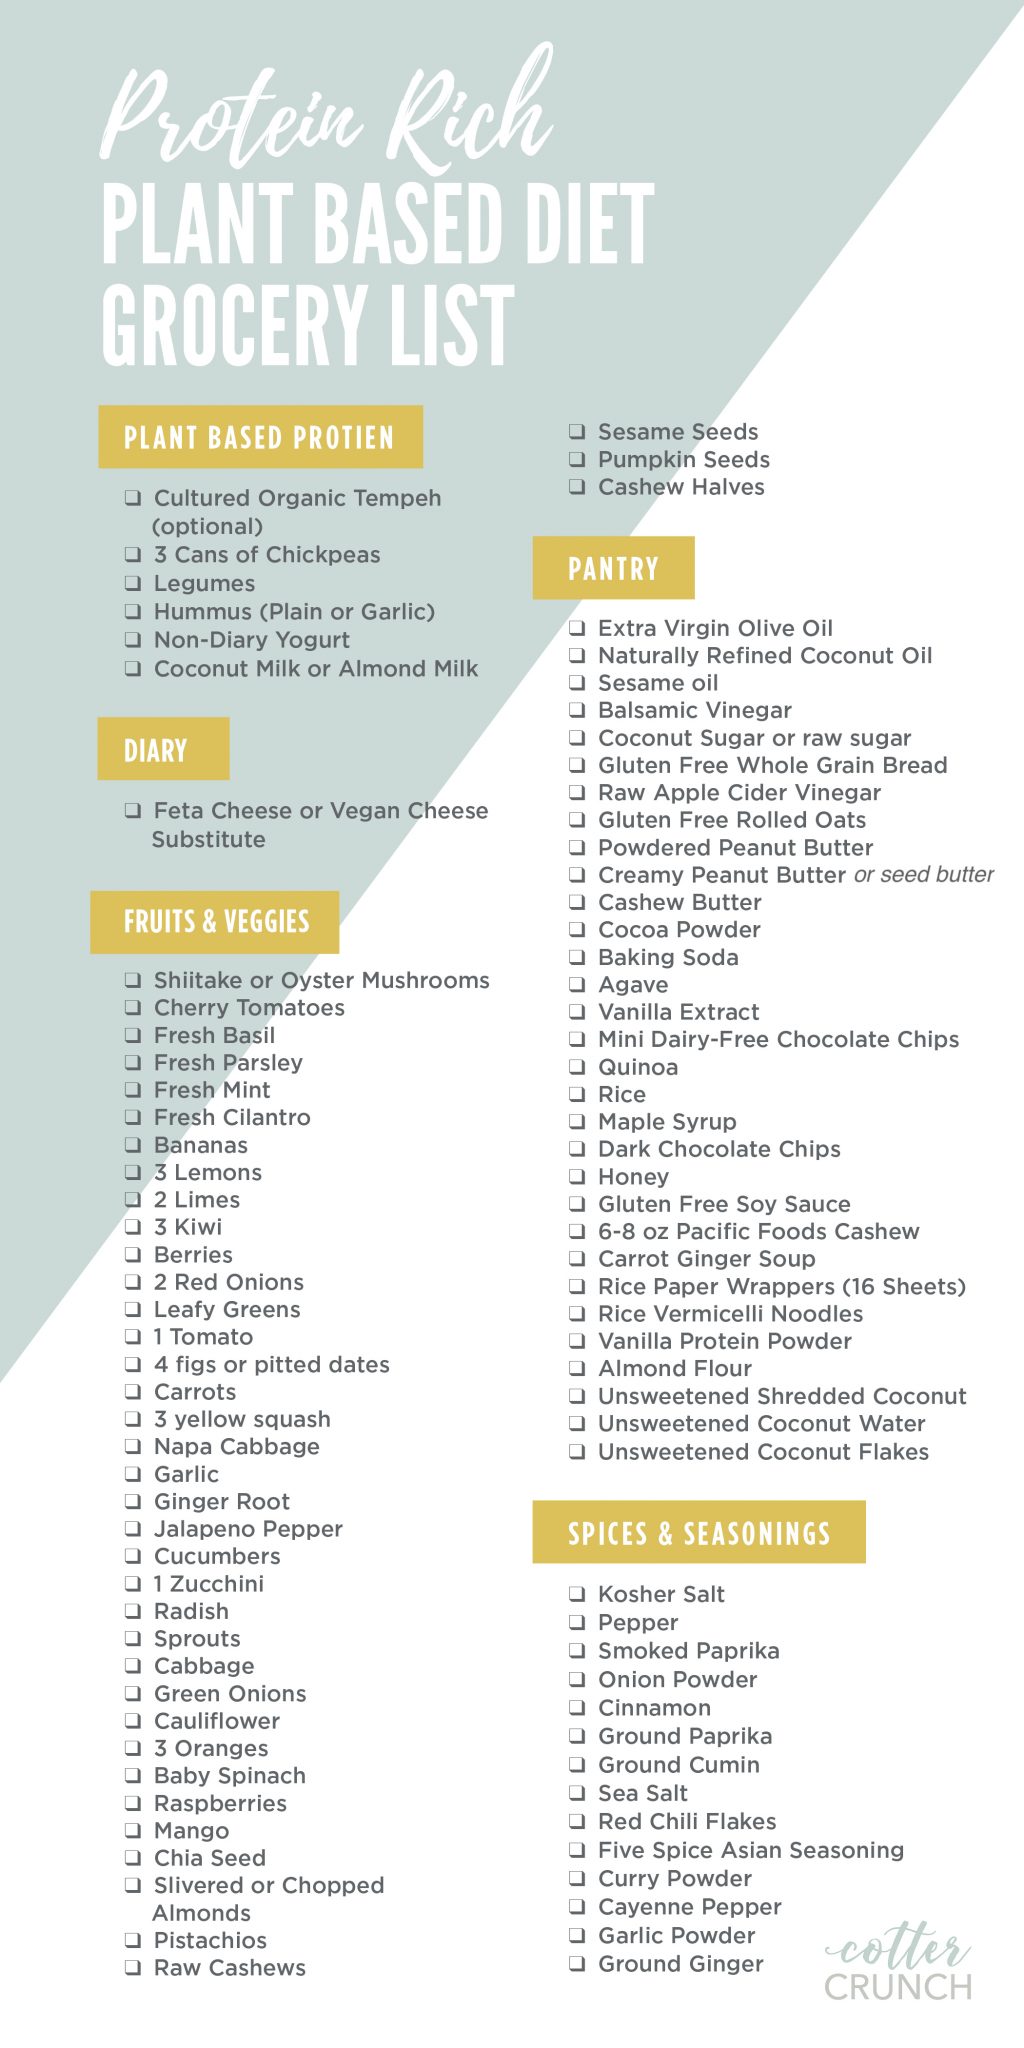 Plant Based Foods Meal Plan and Grocery Shopping List | Cotter Crunch